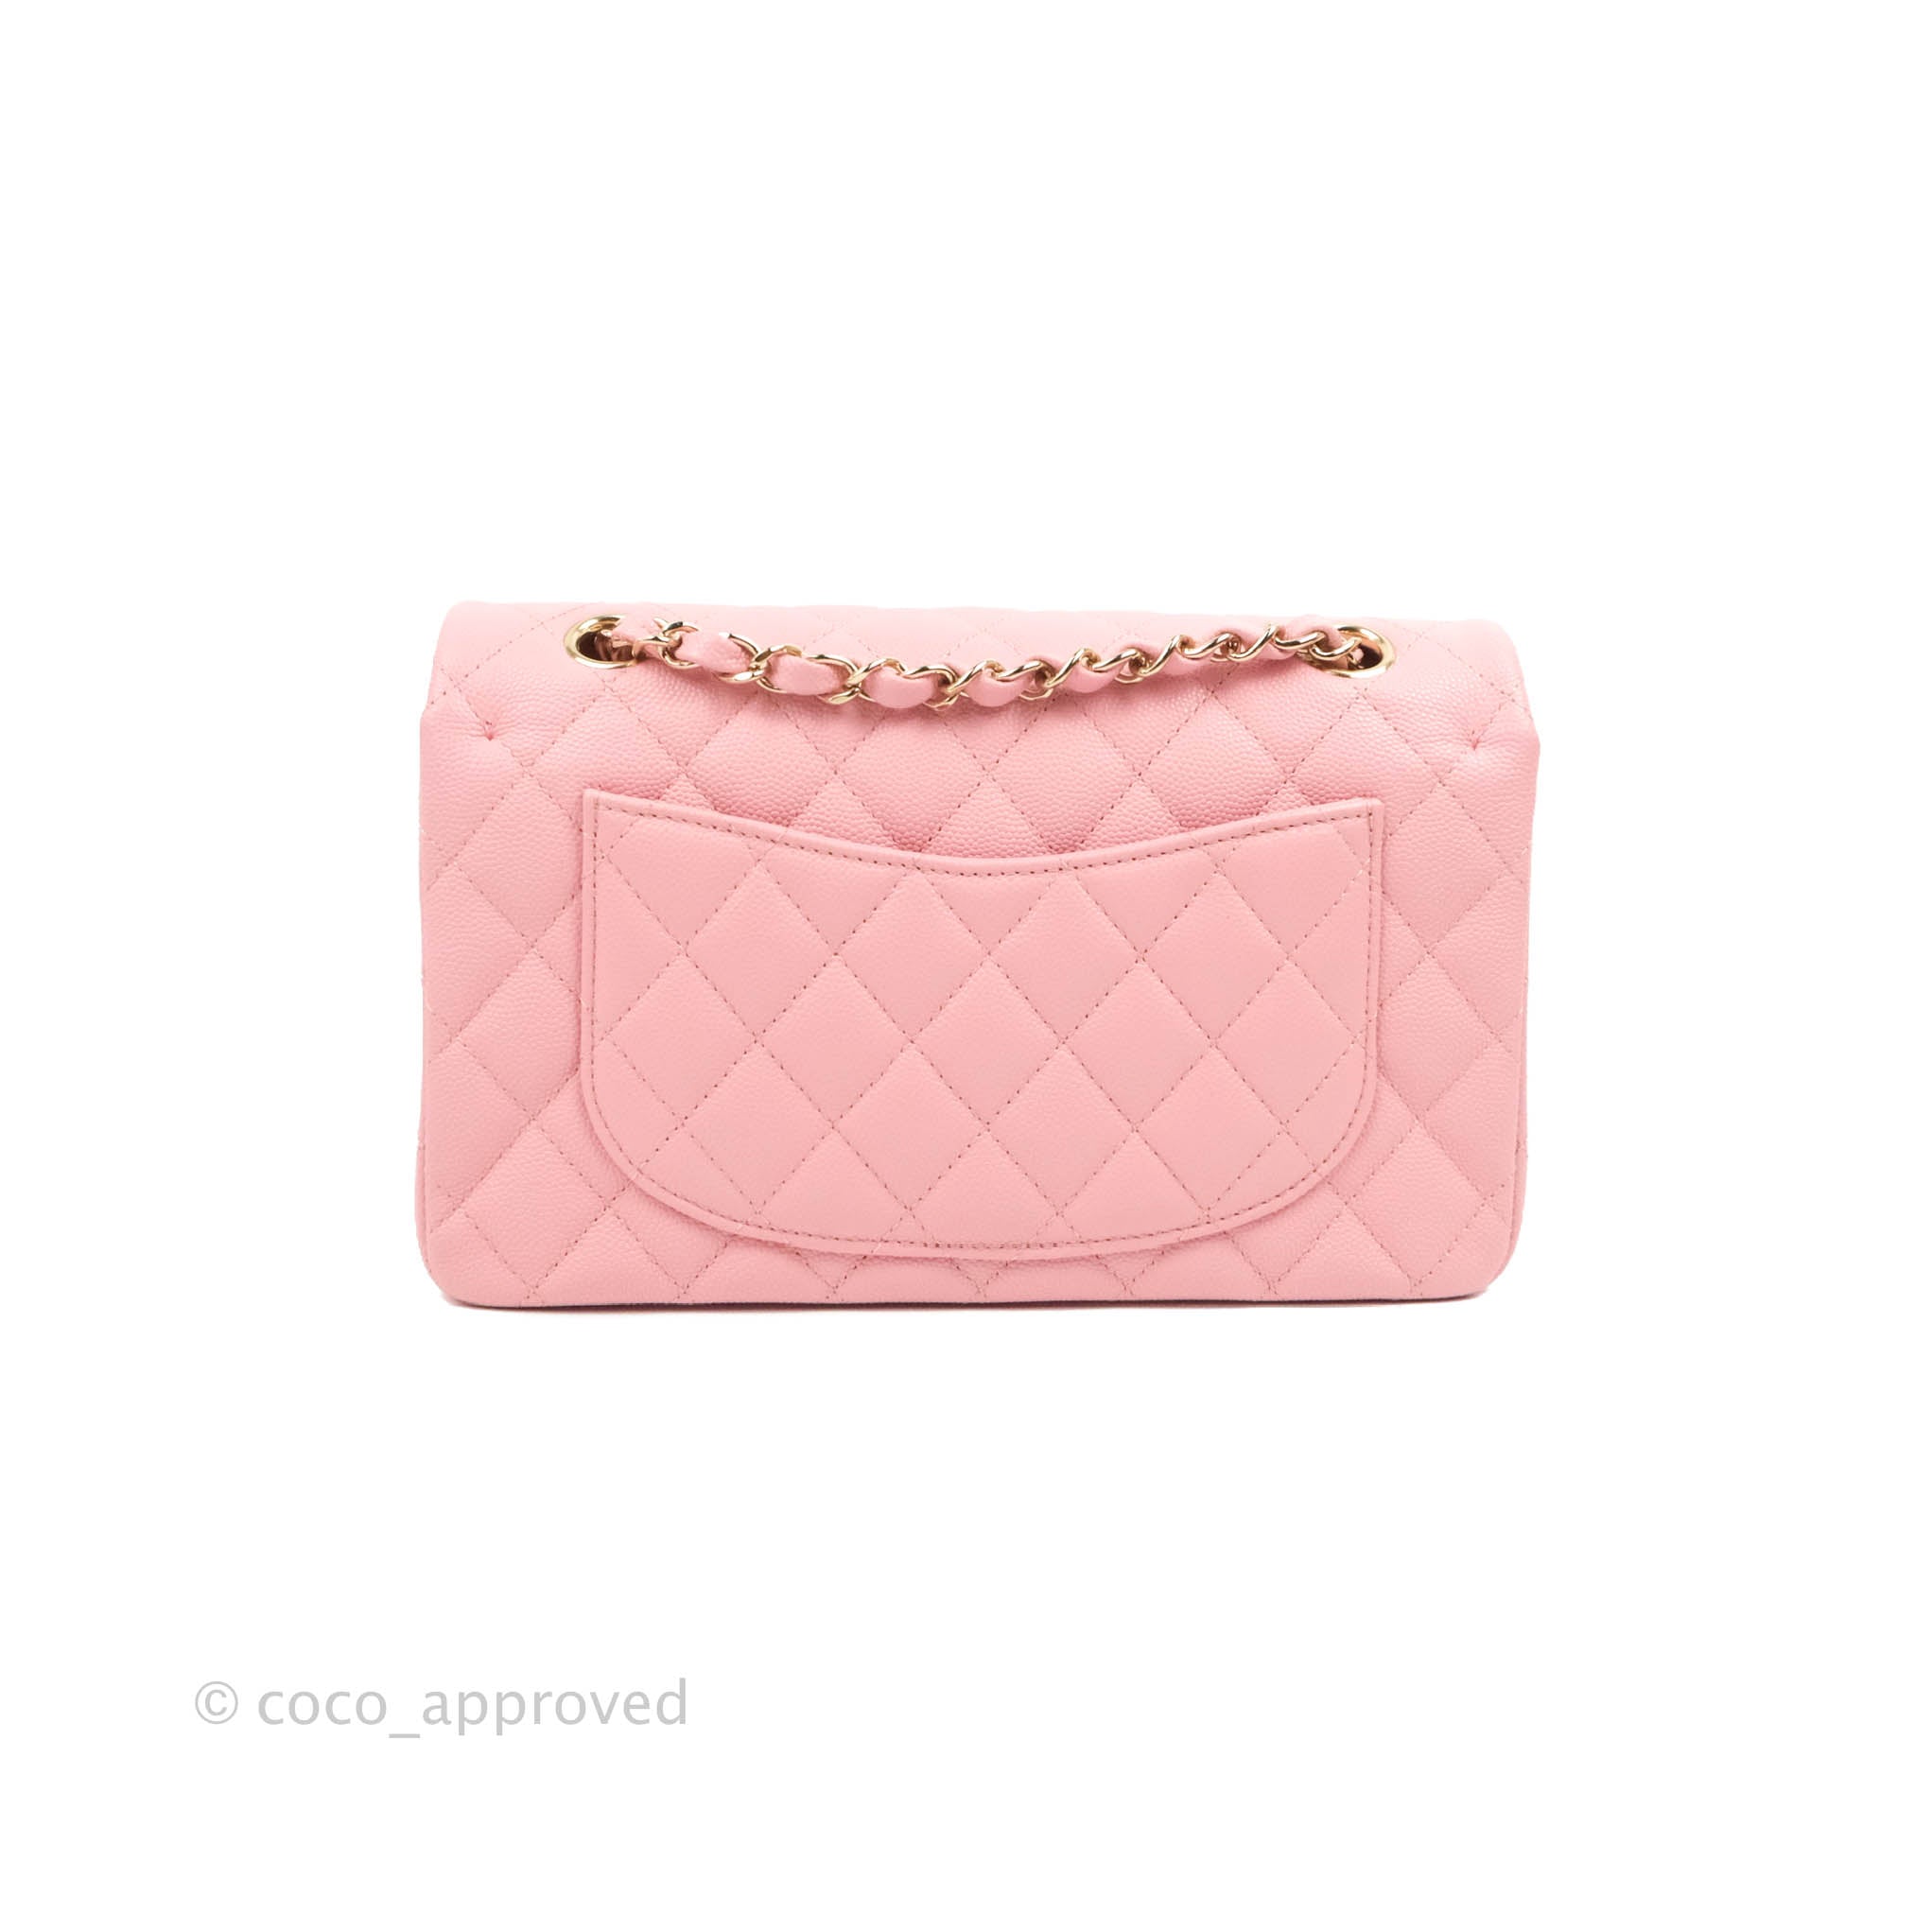 CHANEL, Bags, Chanel Double Flap Hot Pink Matte Caviar Leather